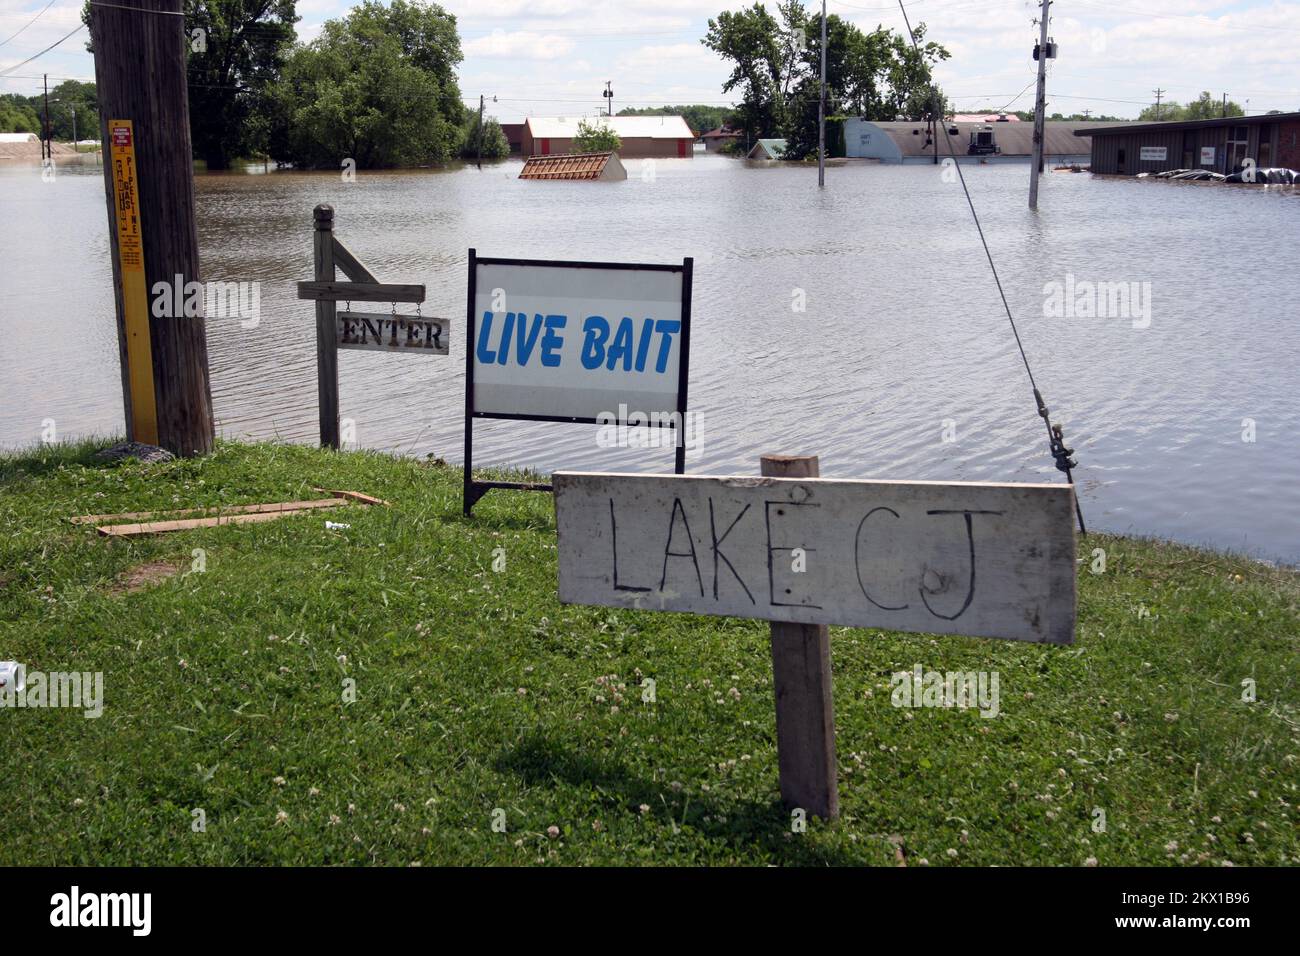 Severe Storms, Tornadoes, and Flooding,  Columbus Junction, IA, June 16, 2008   The flooded section of lower Columbus Junction now has sign that names a newly created lake, thanks to an anonymous resident. The high water from the rain-swelled Iowa and Cedar rivers broke through the town's levee on Saturday night.. Photographs Relating to Disasters and Emergency Management Programs, Activities, and Officials Stock Photo